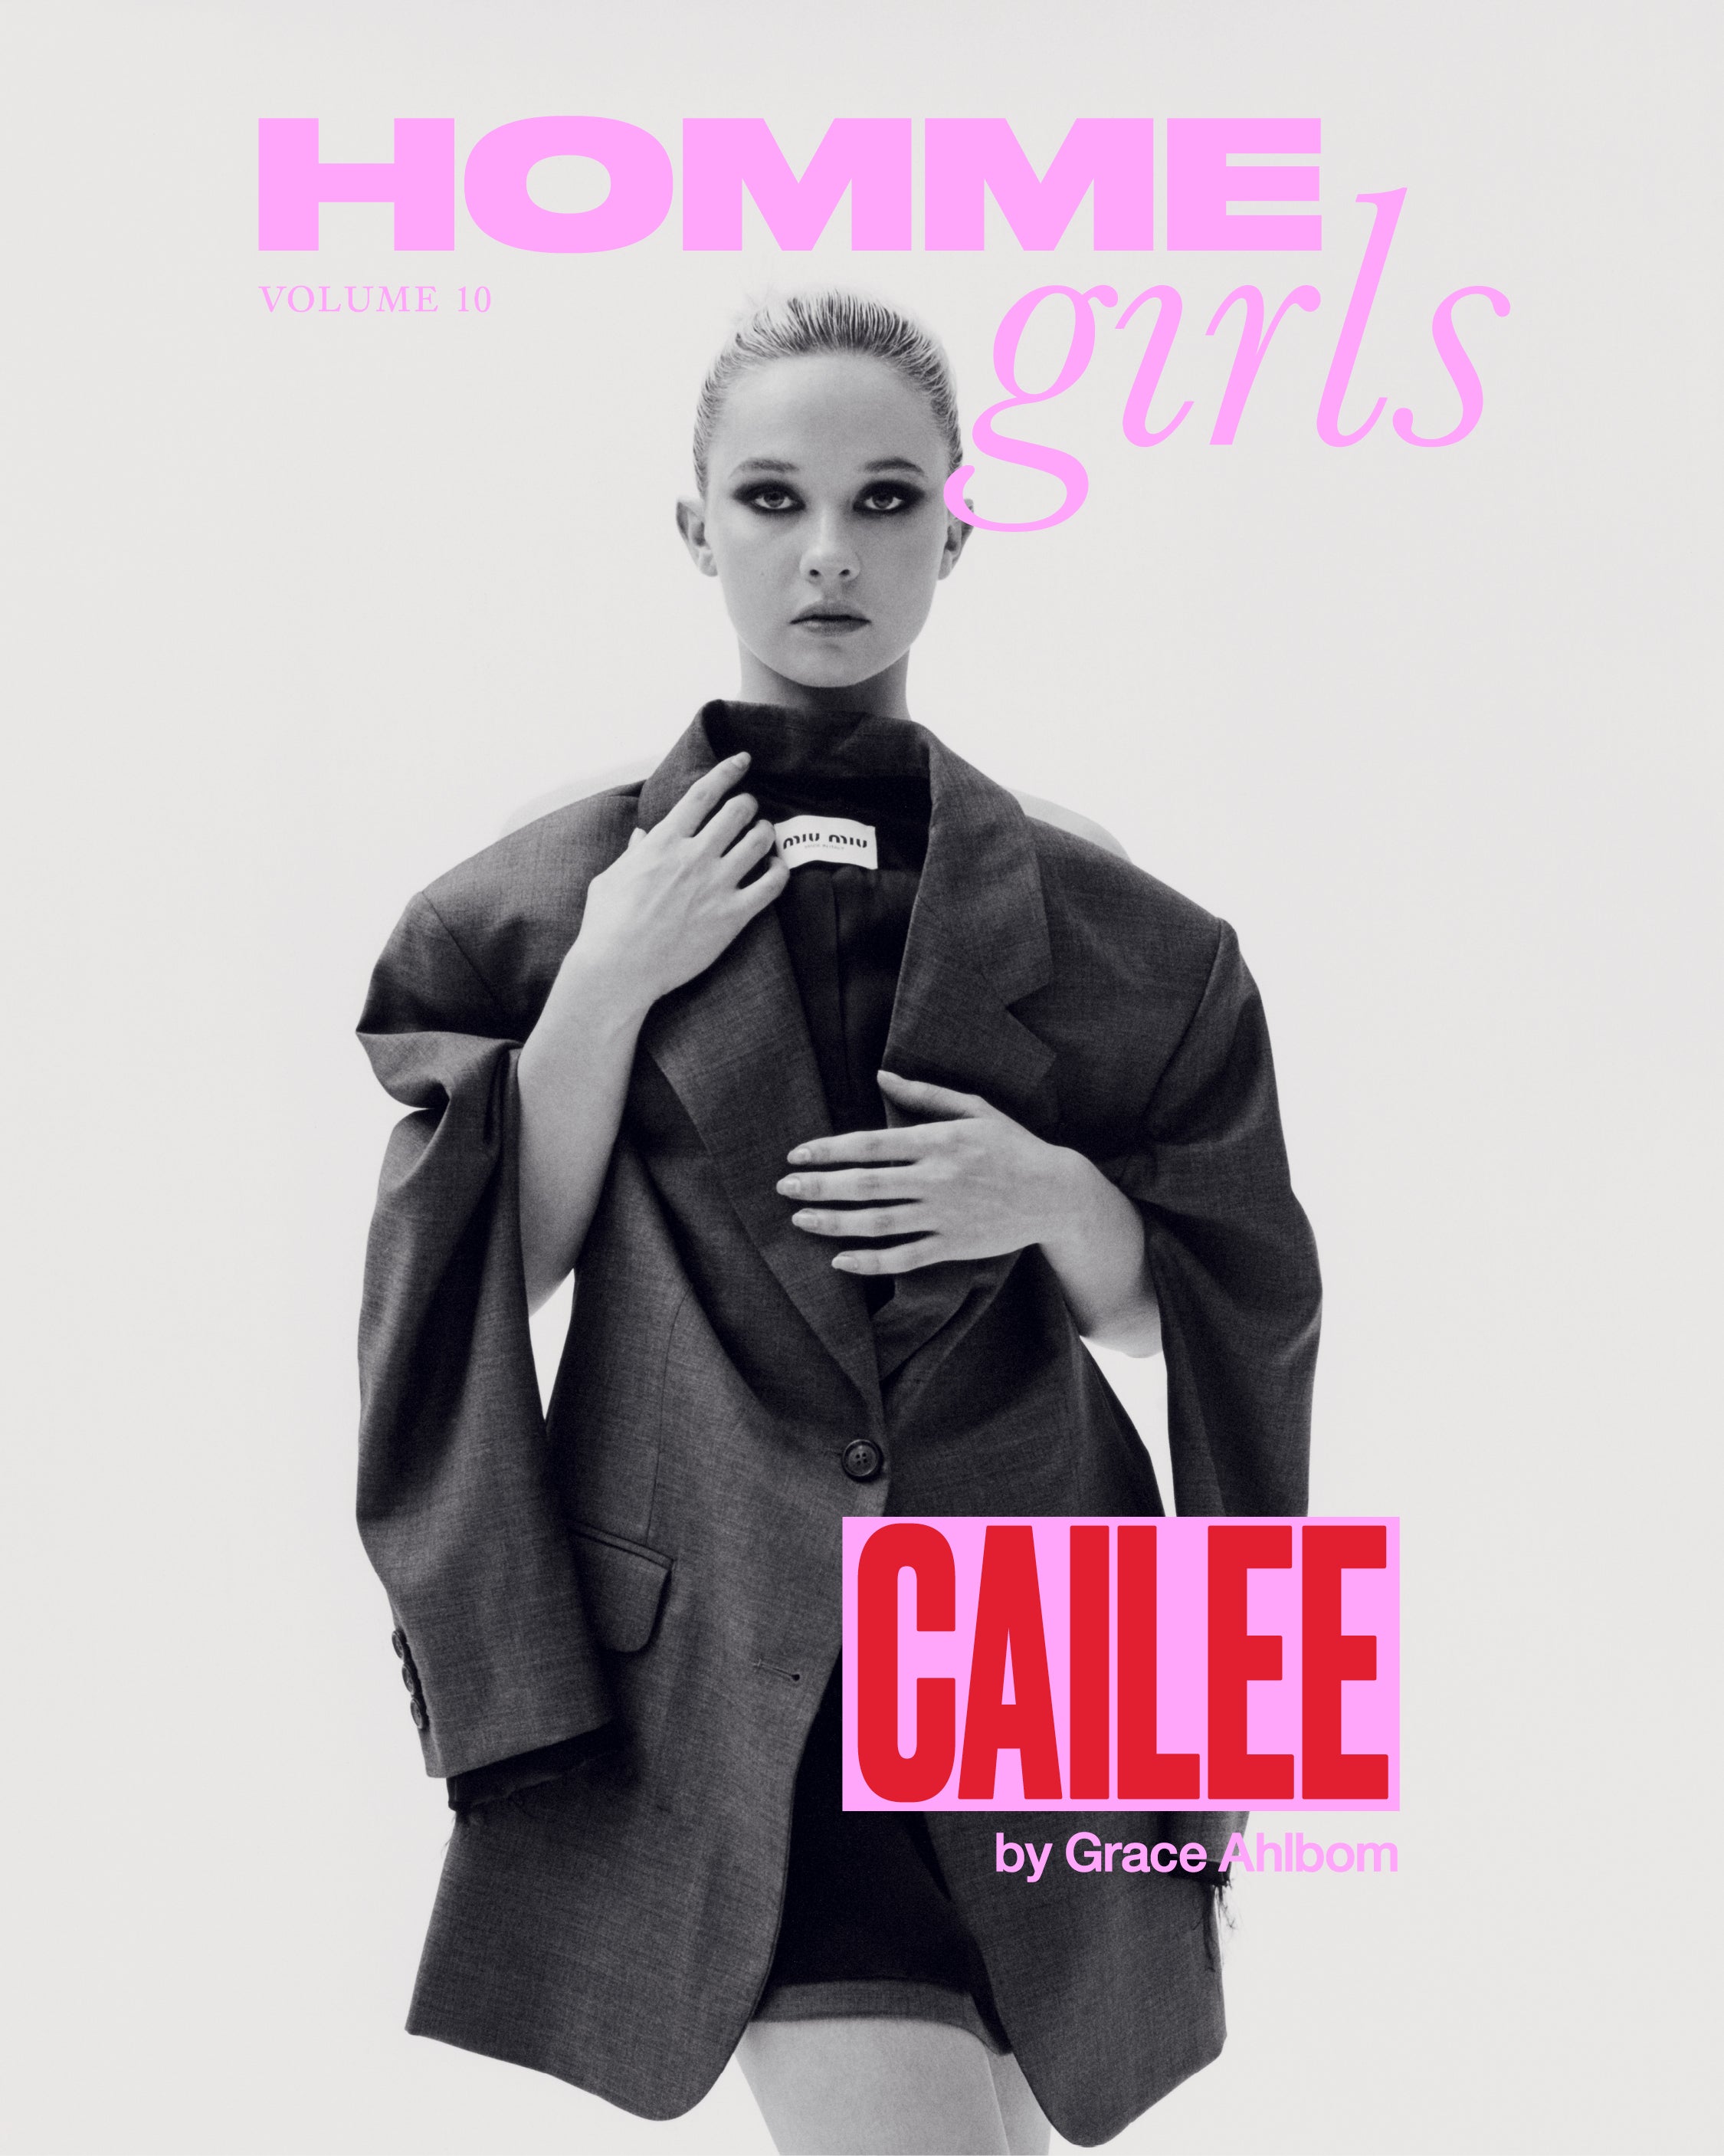 VOLUME 10 - CAILEE